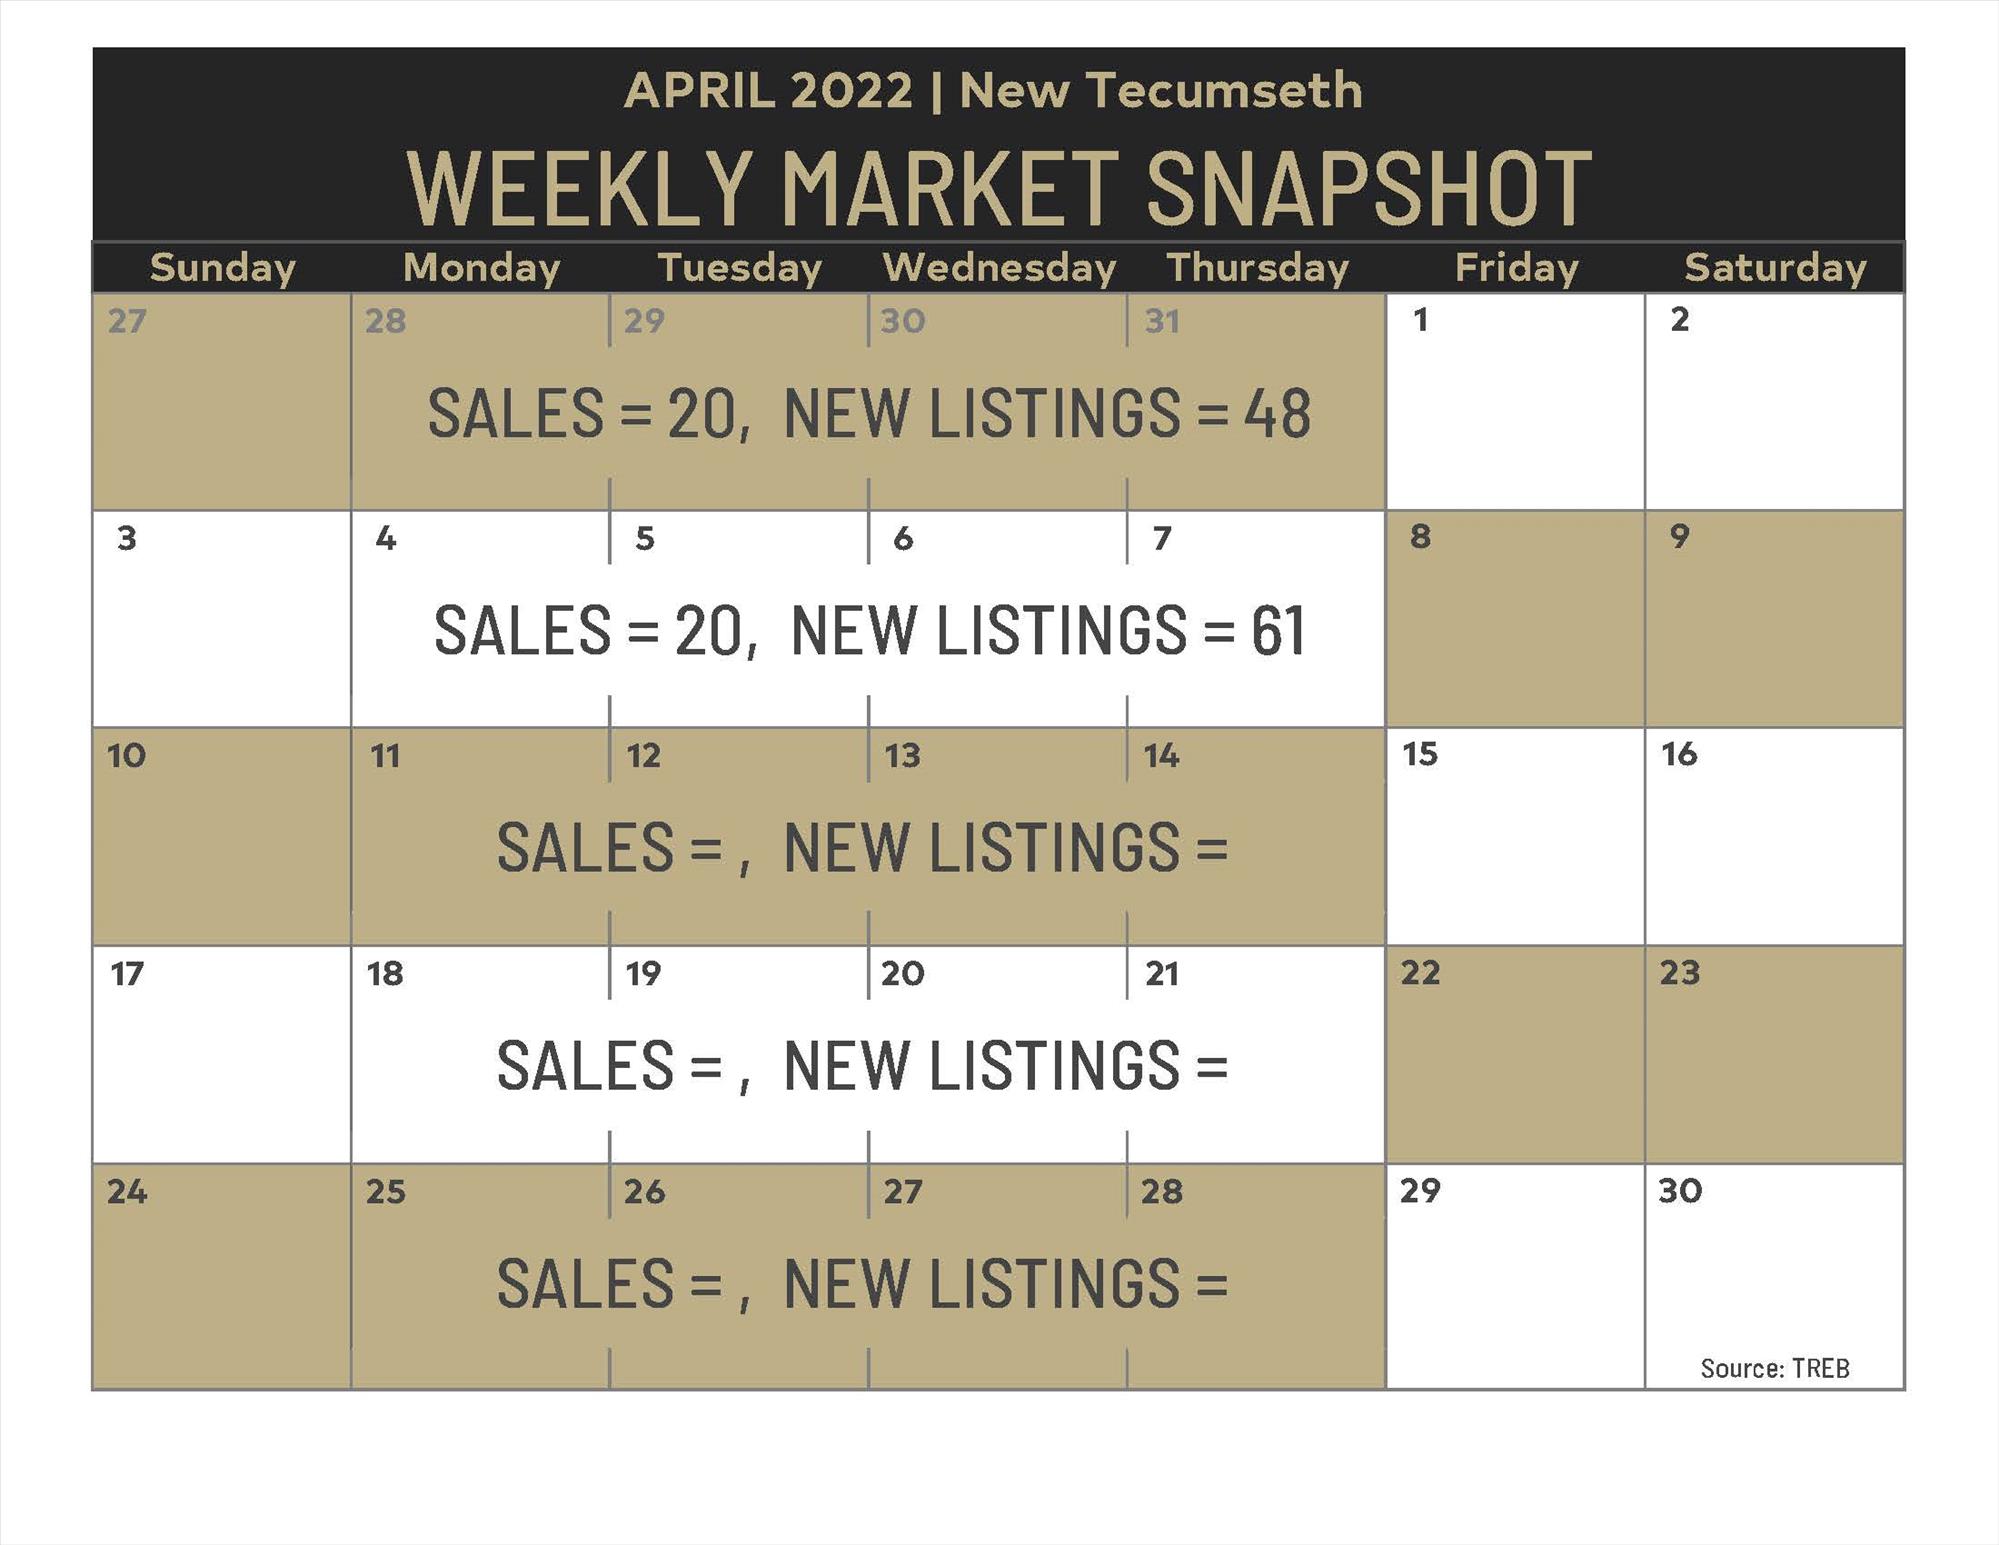 Weekly Market Snapshot: March 18 - April 7, 2022 